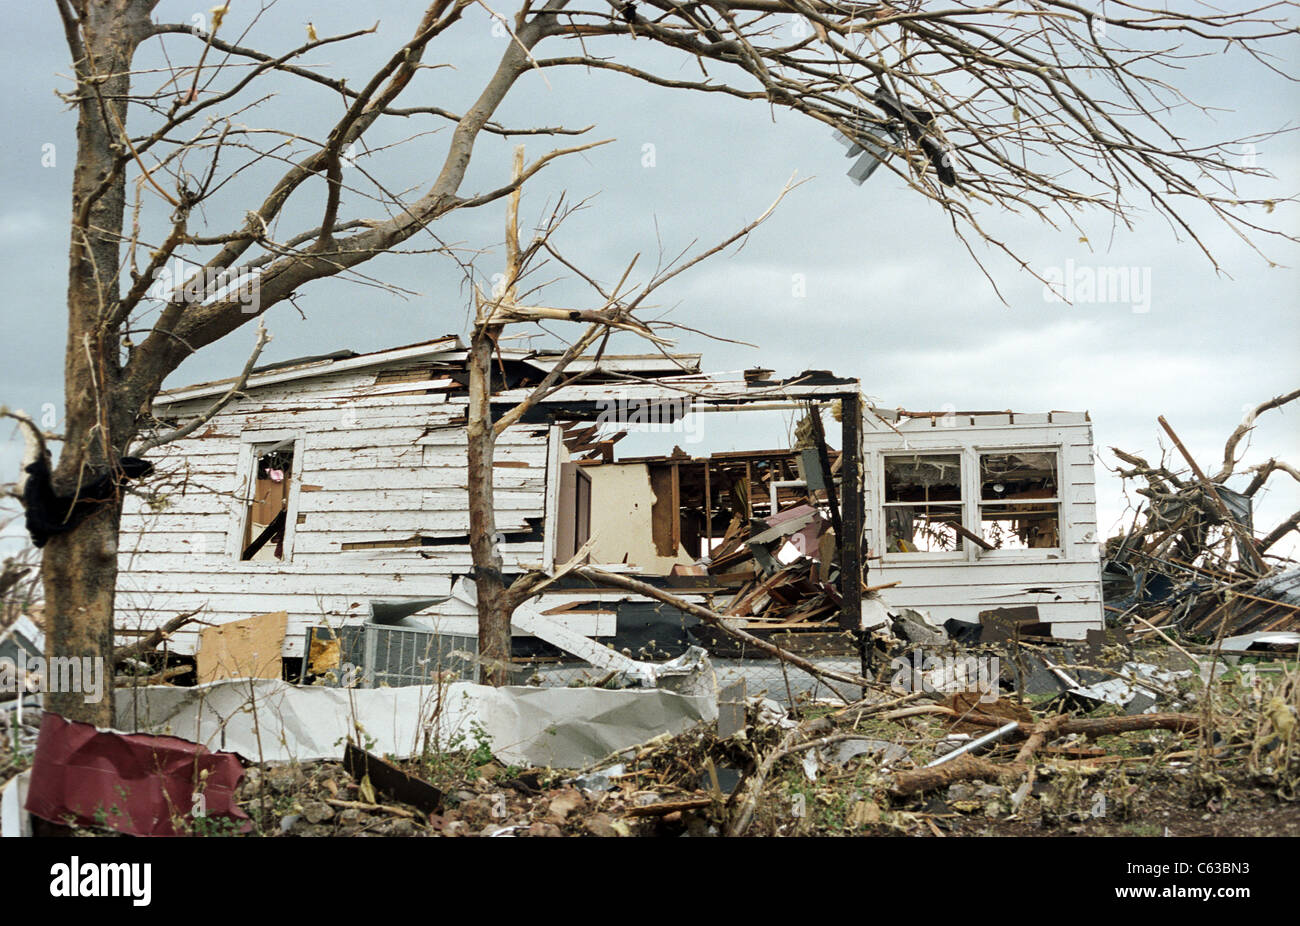 A home destroyed by an EF-5 tornado in Joplin, Missouri, May 25, 2011. Stock Photo